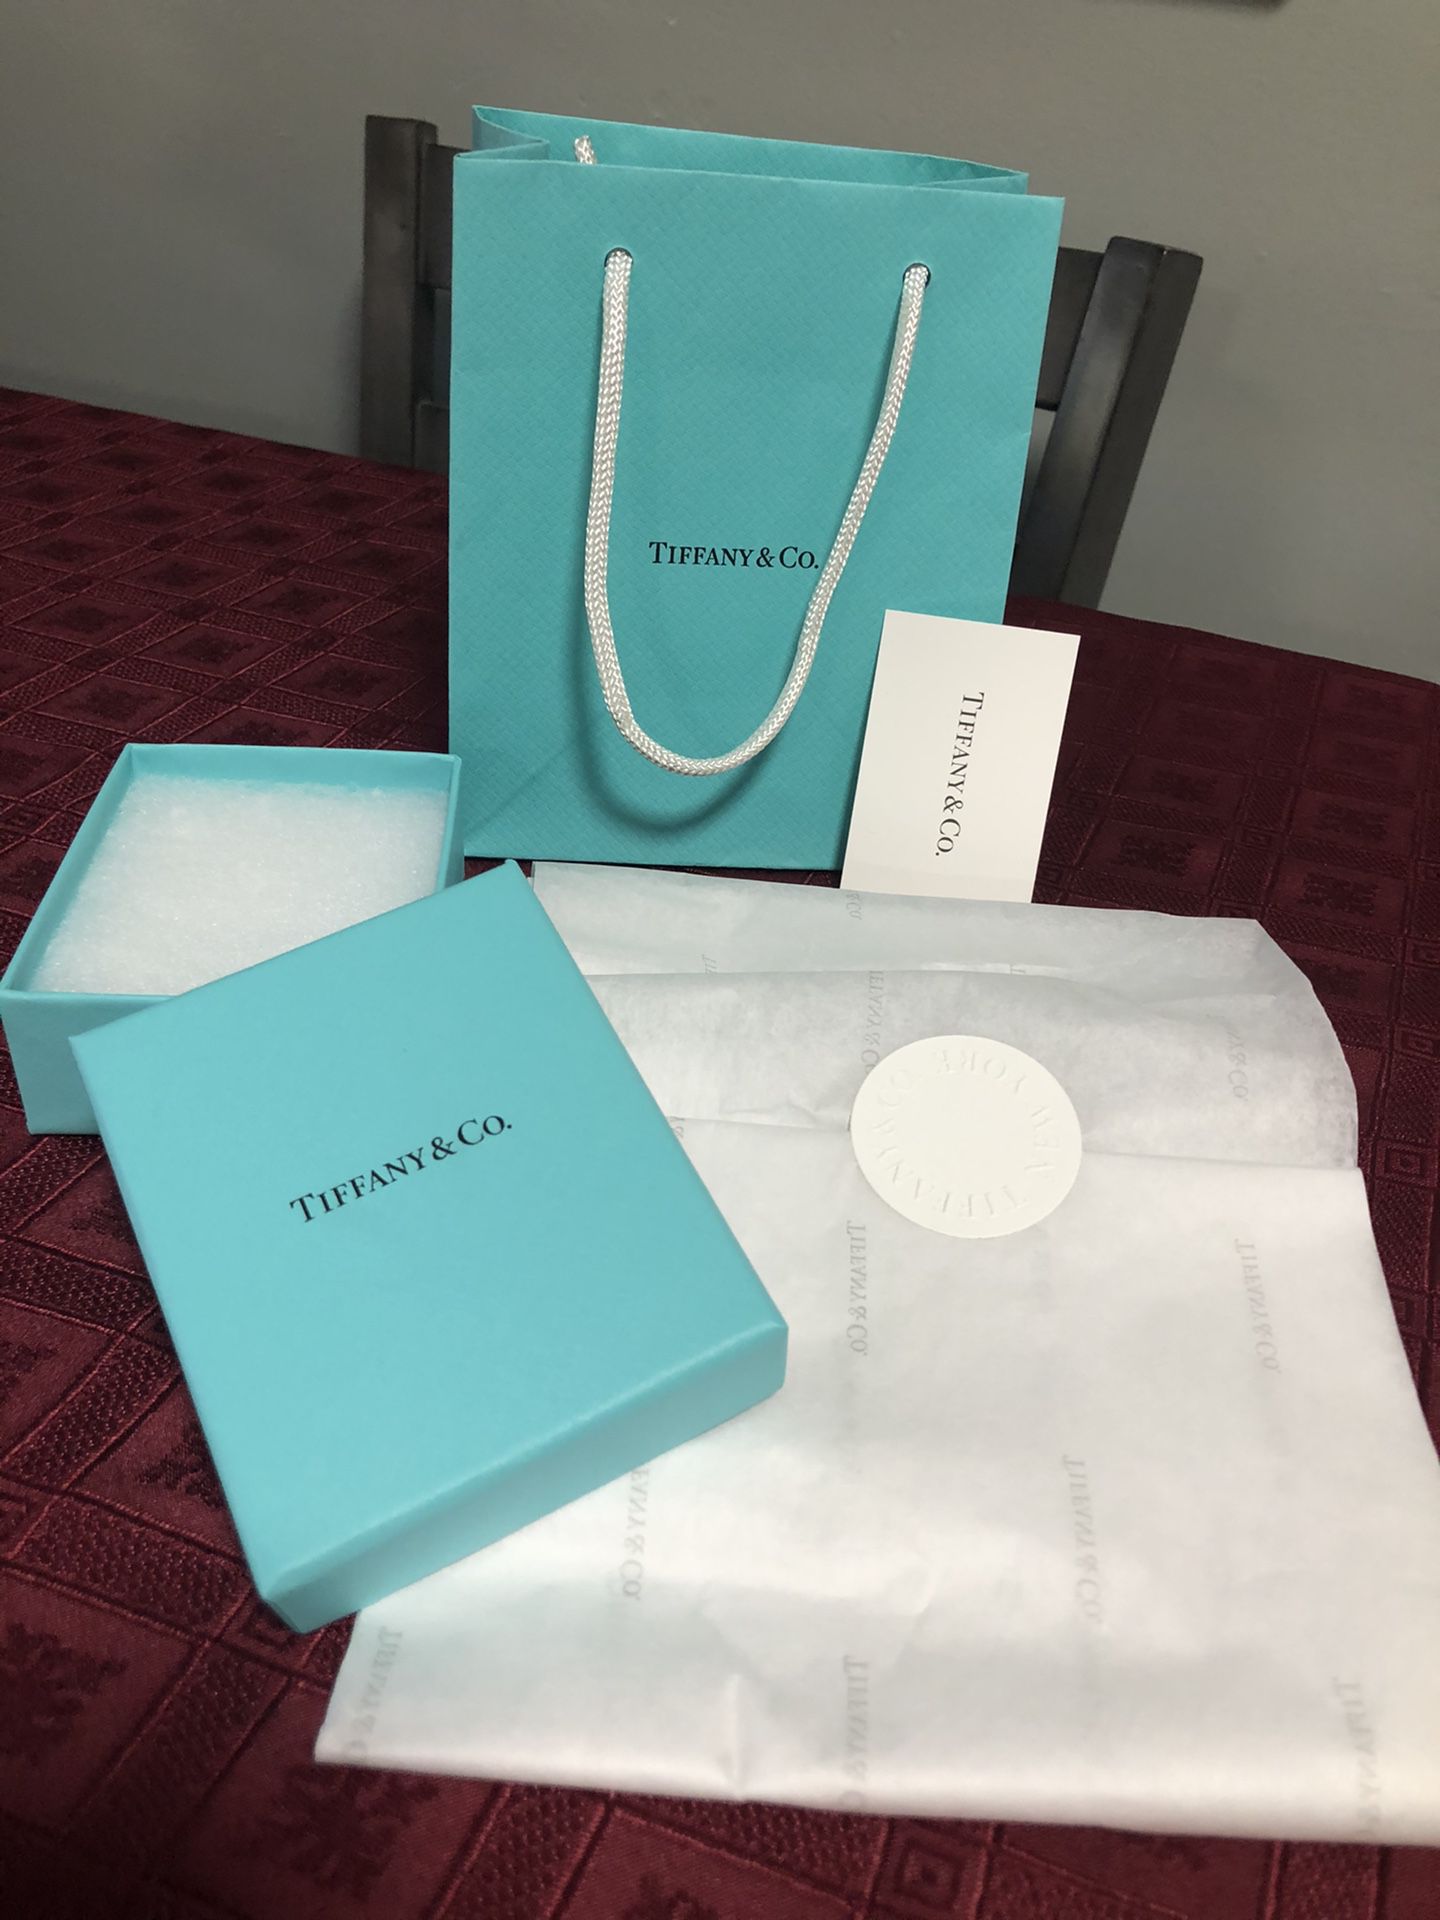 Tiffany & Co Box With Bag and Tissue Paper